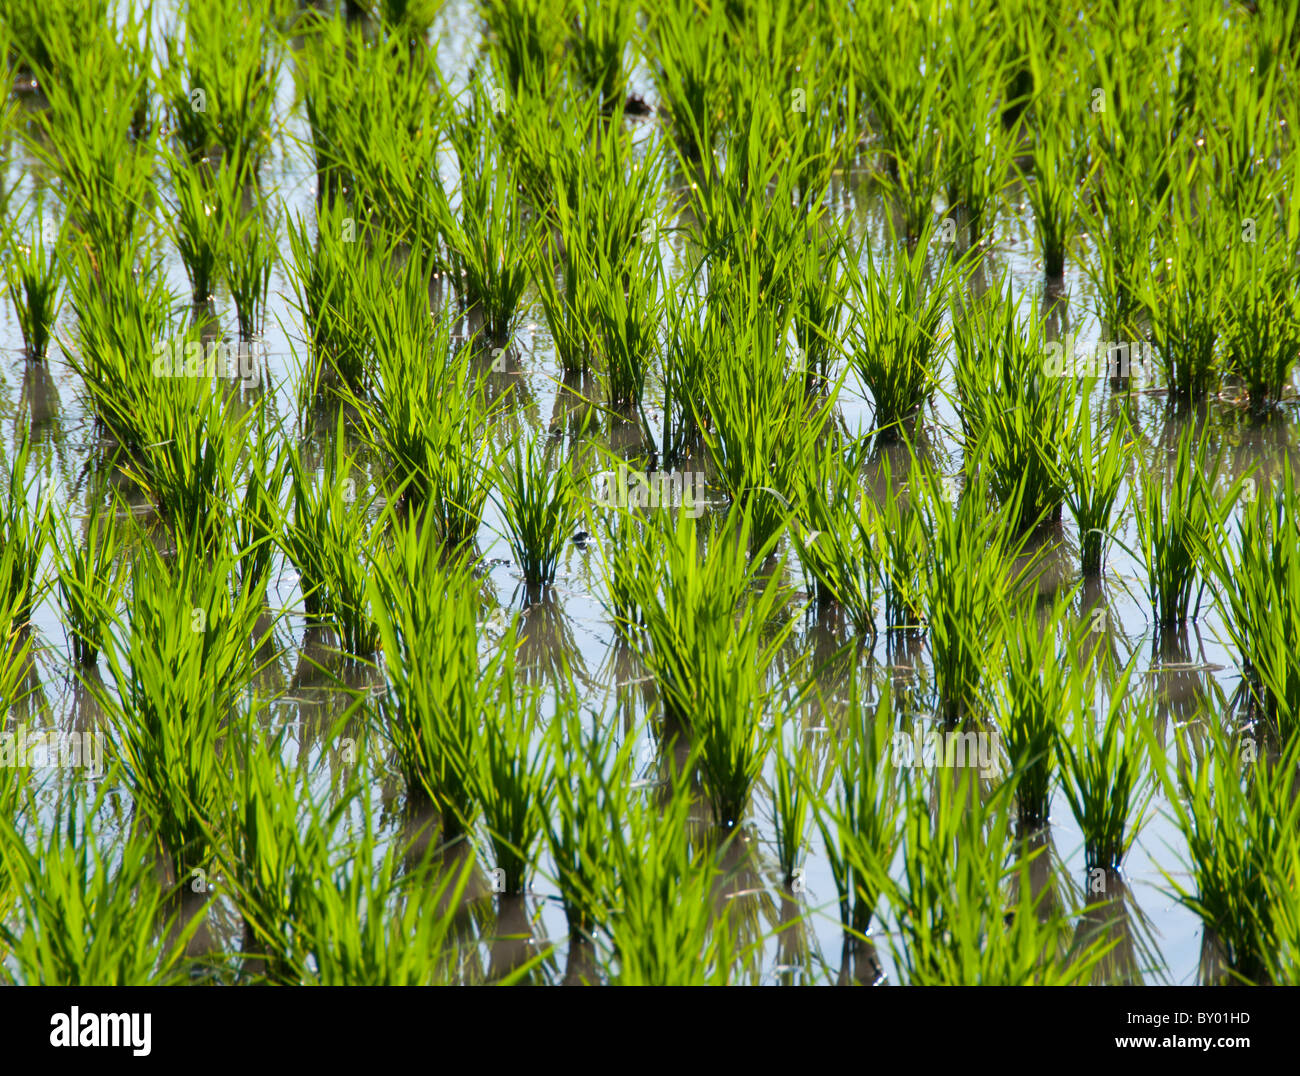 Rice plants growing in a paddy field in asia Stock Photo